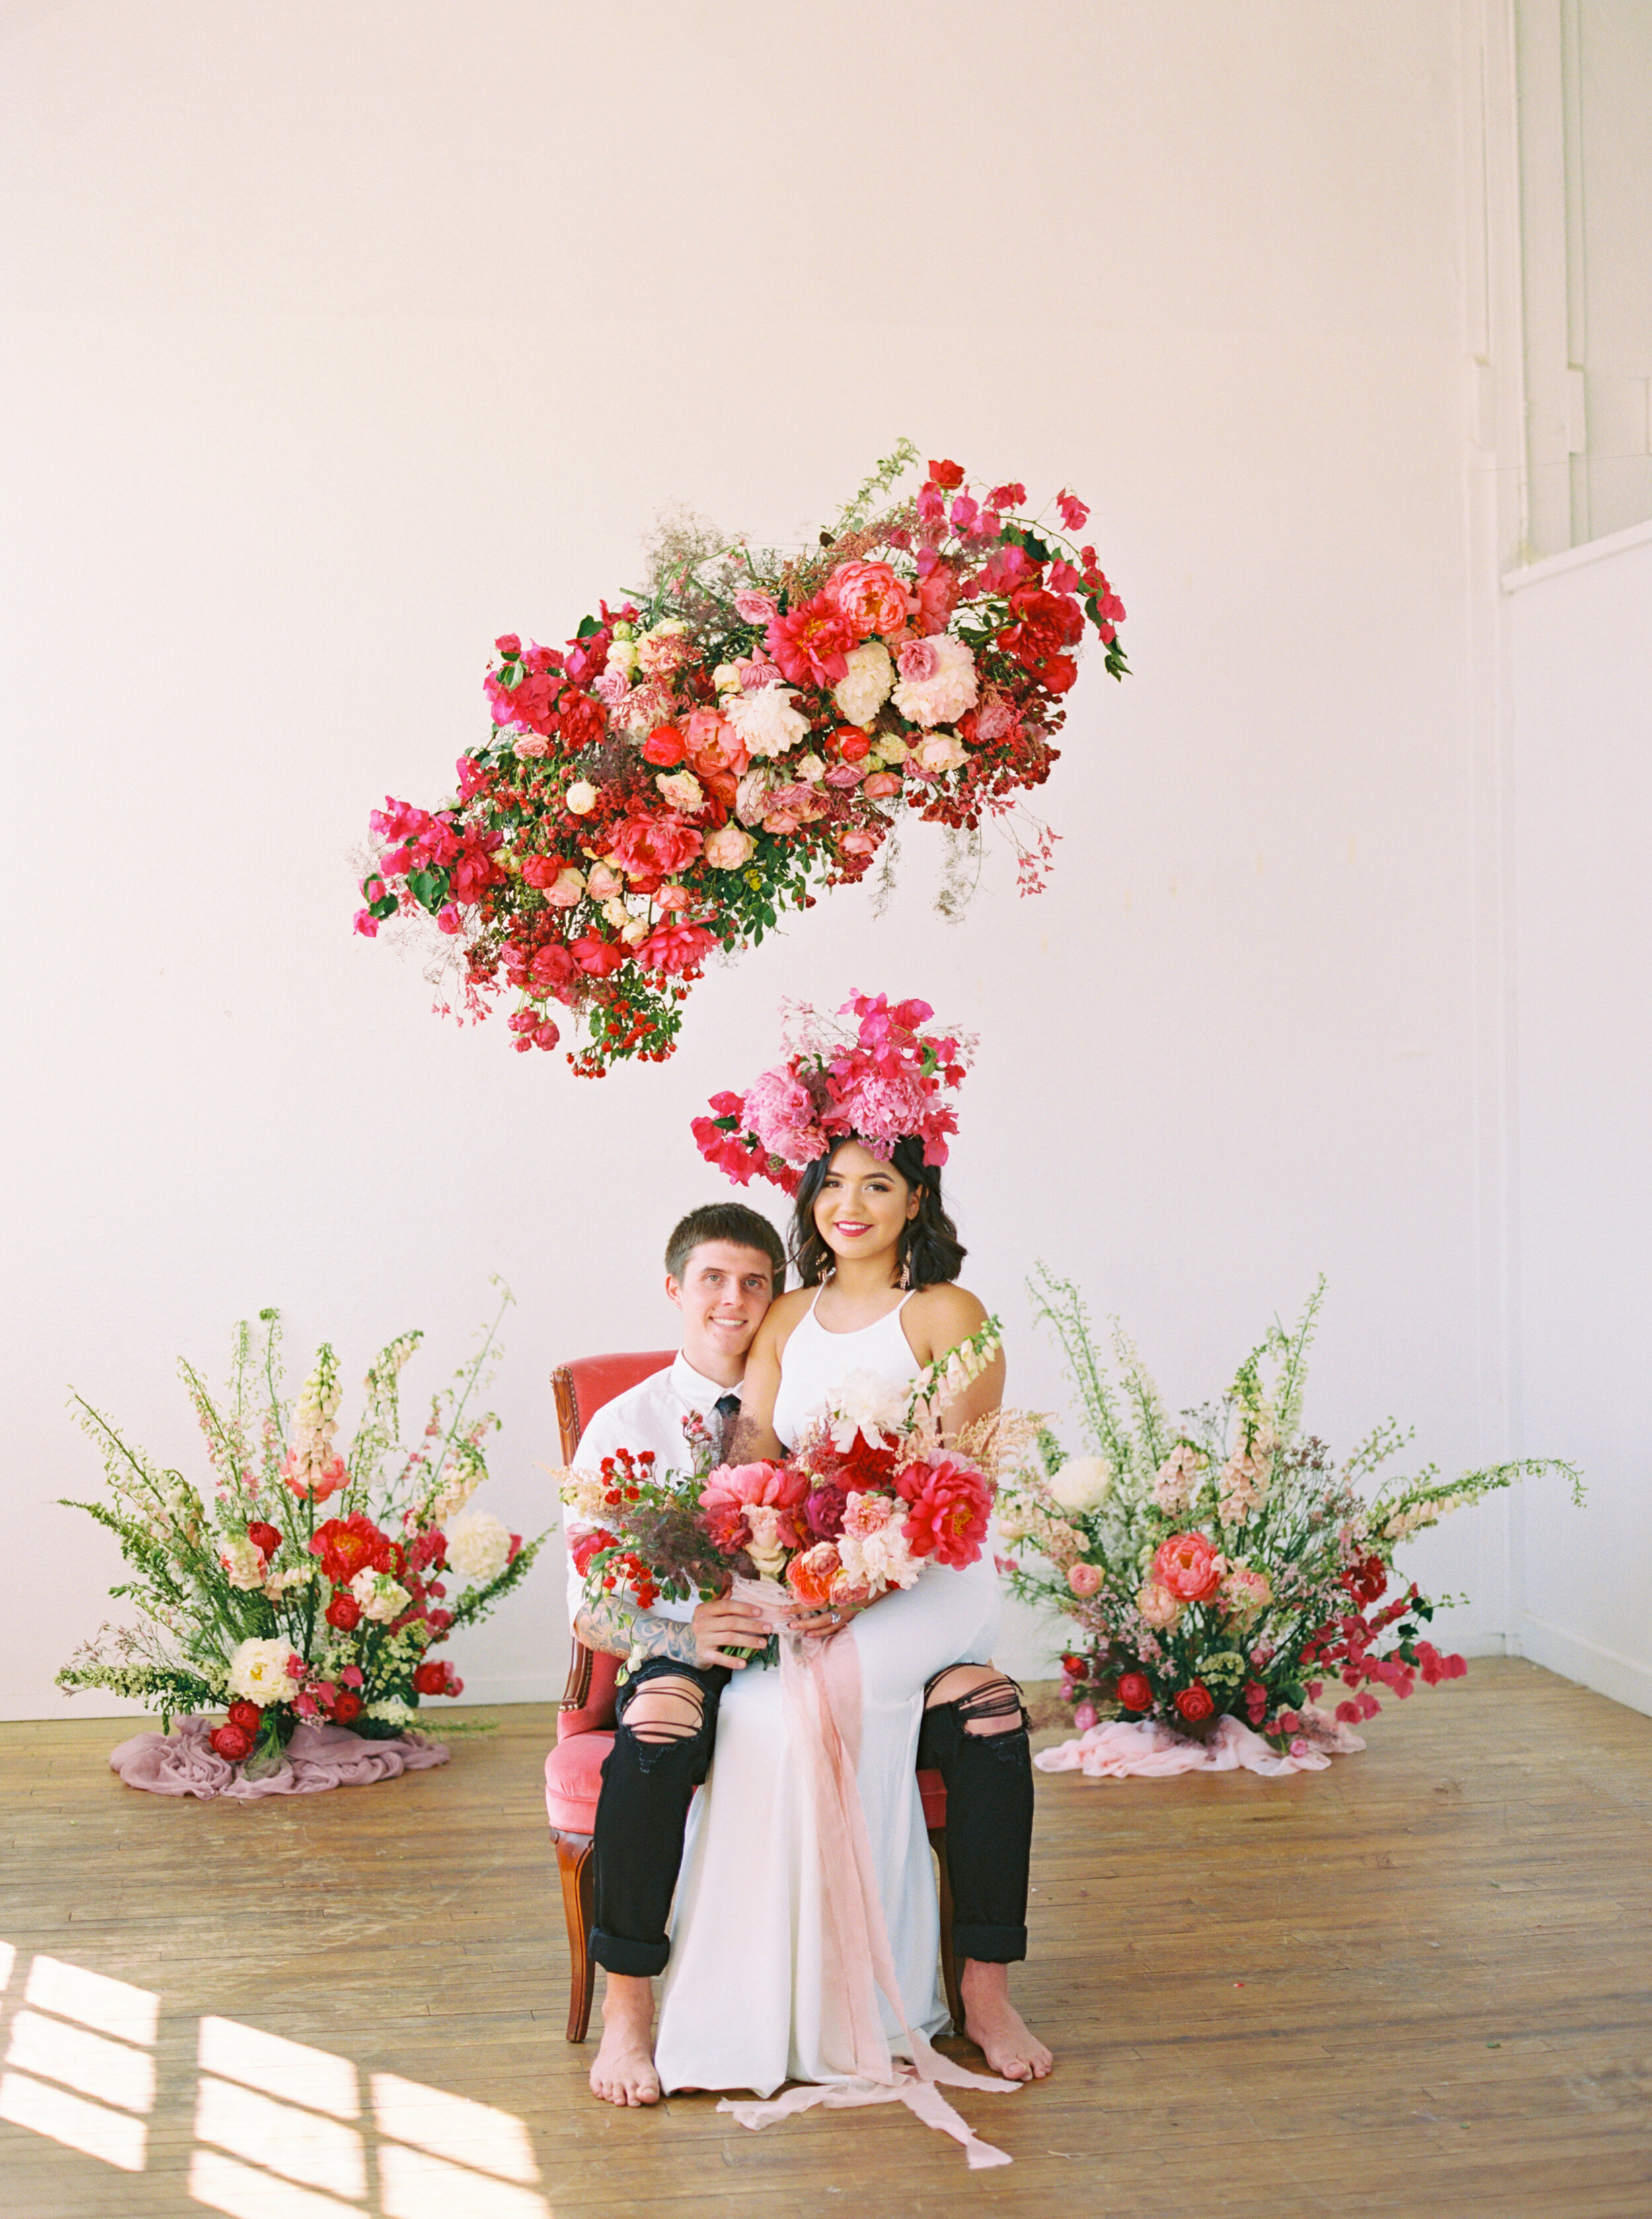 A Romantic Wedding Elopement Filled with Colorful Fuchsia - Sarahi Hadden Submission-123.jpg